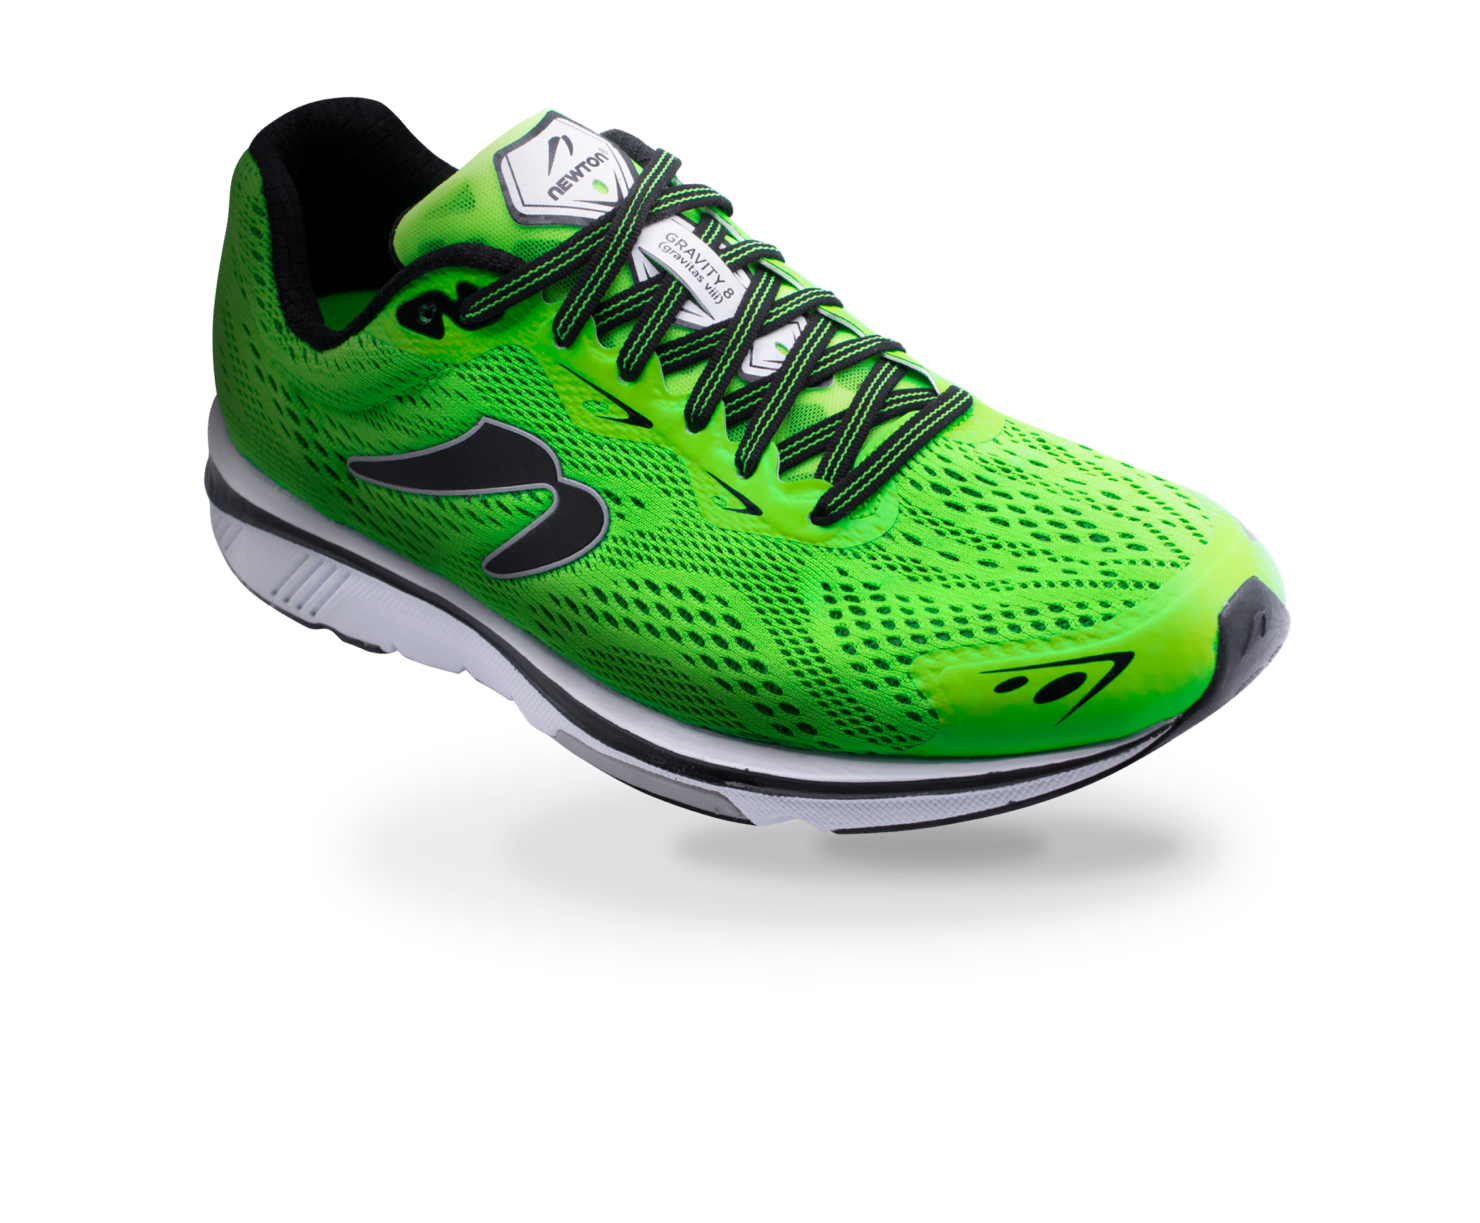 Newton Running Shoes PNG HD Image pngteam.com